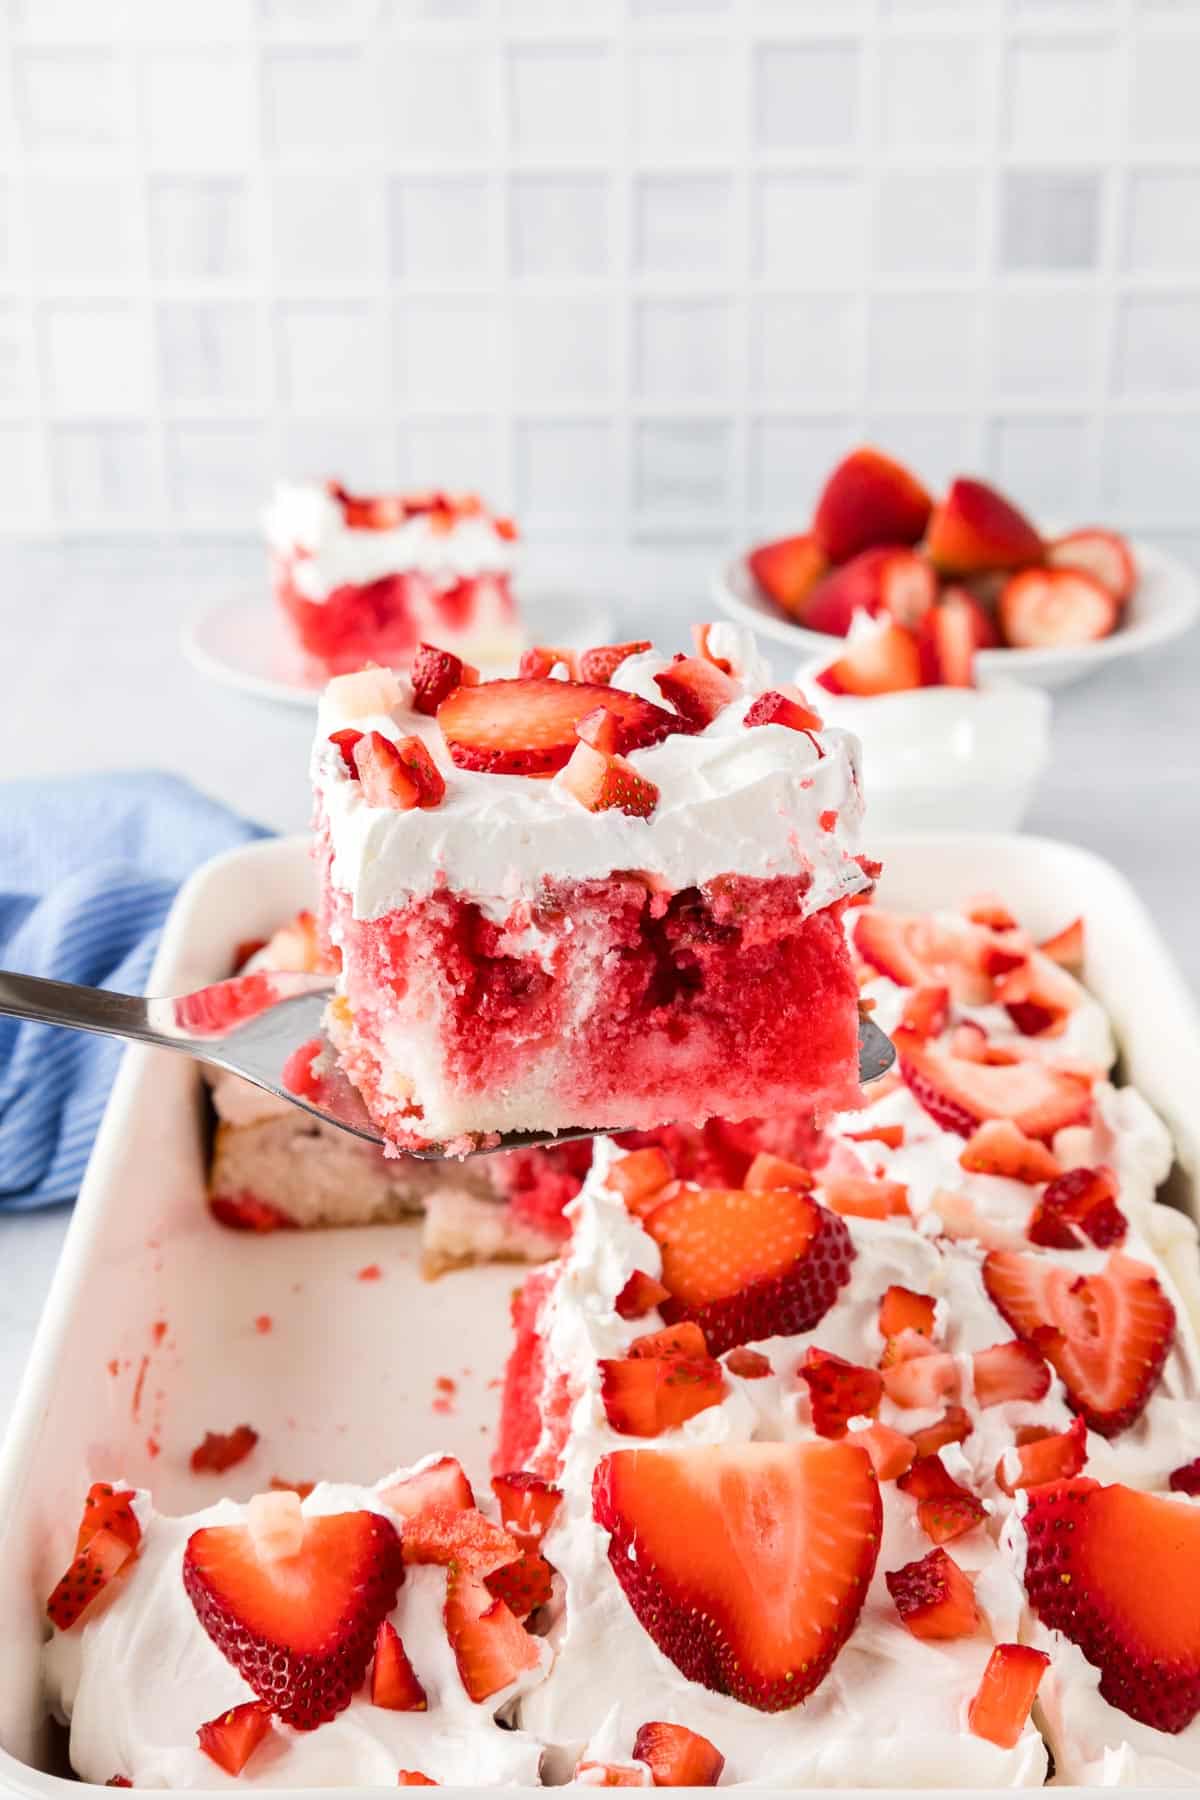 A piece of red and white strawberry poke cake topped with whipped cream and strawberry slices being lifted from a baking dish.